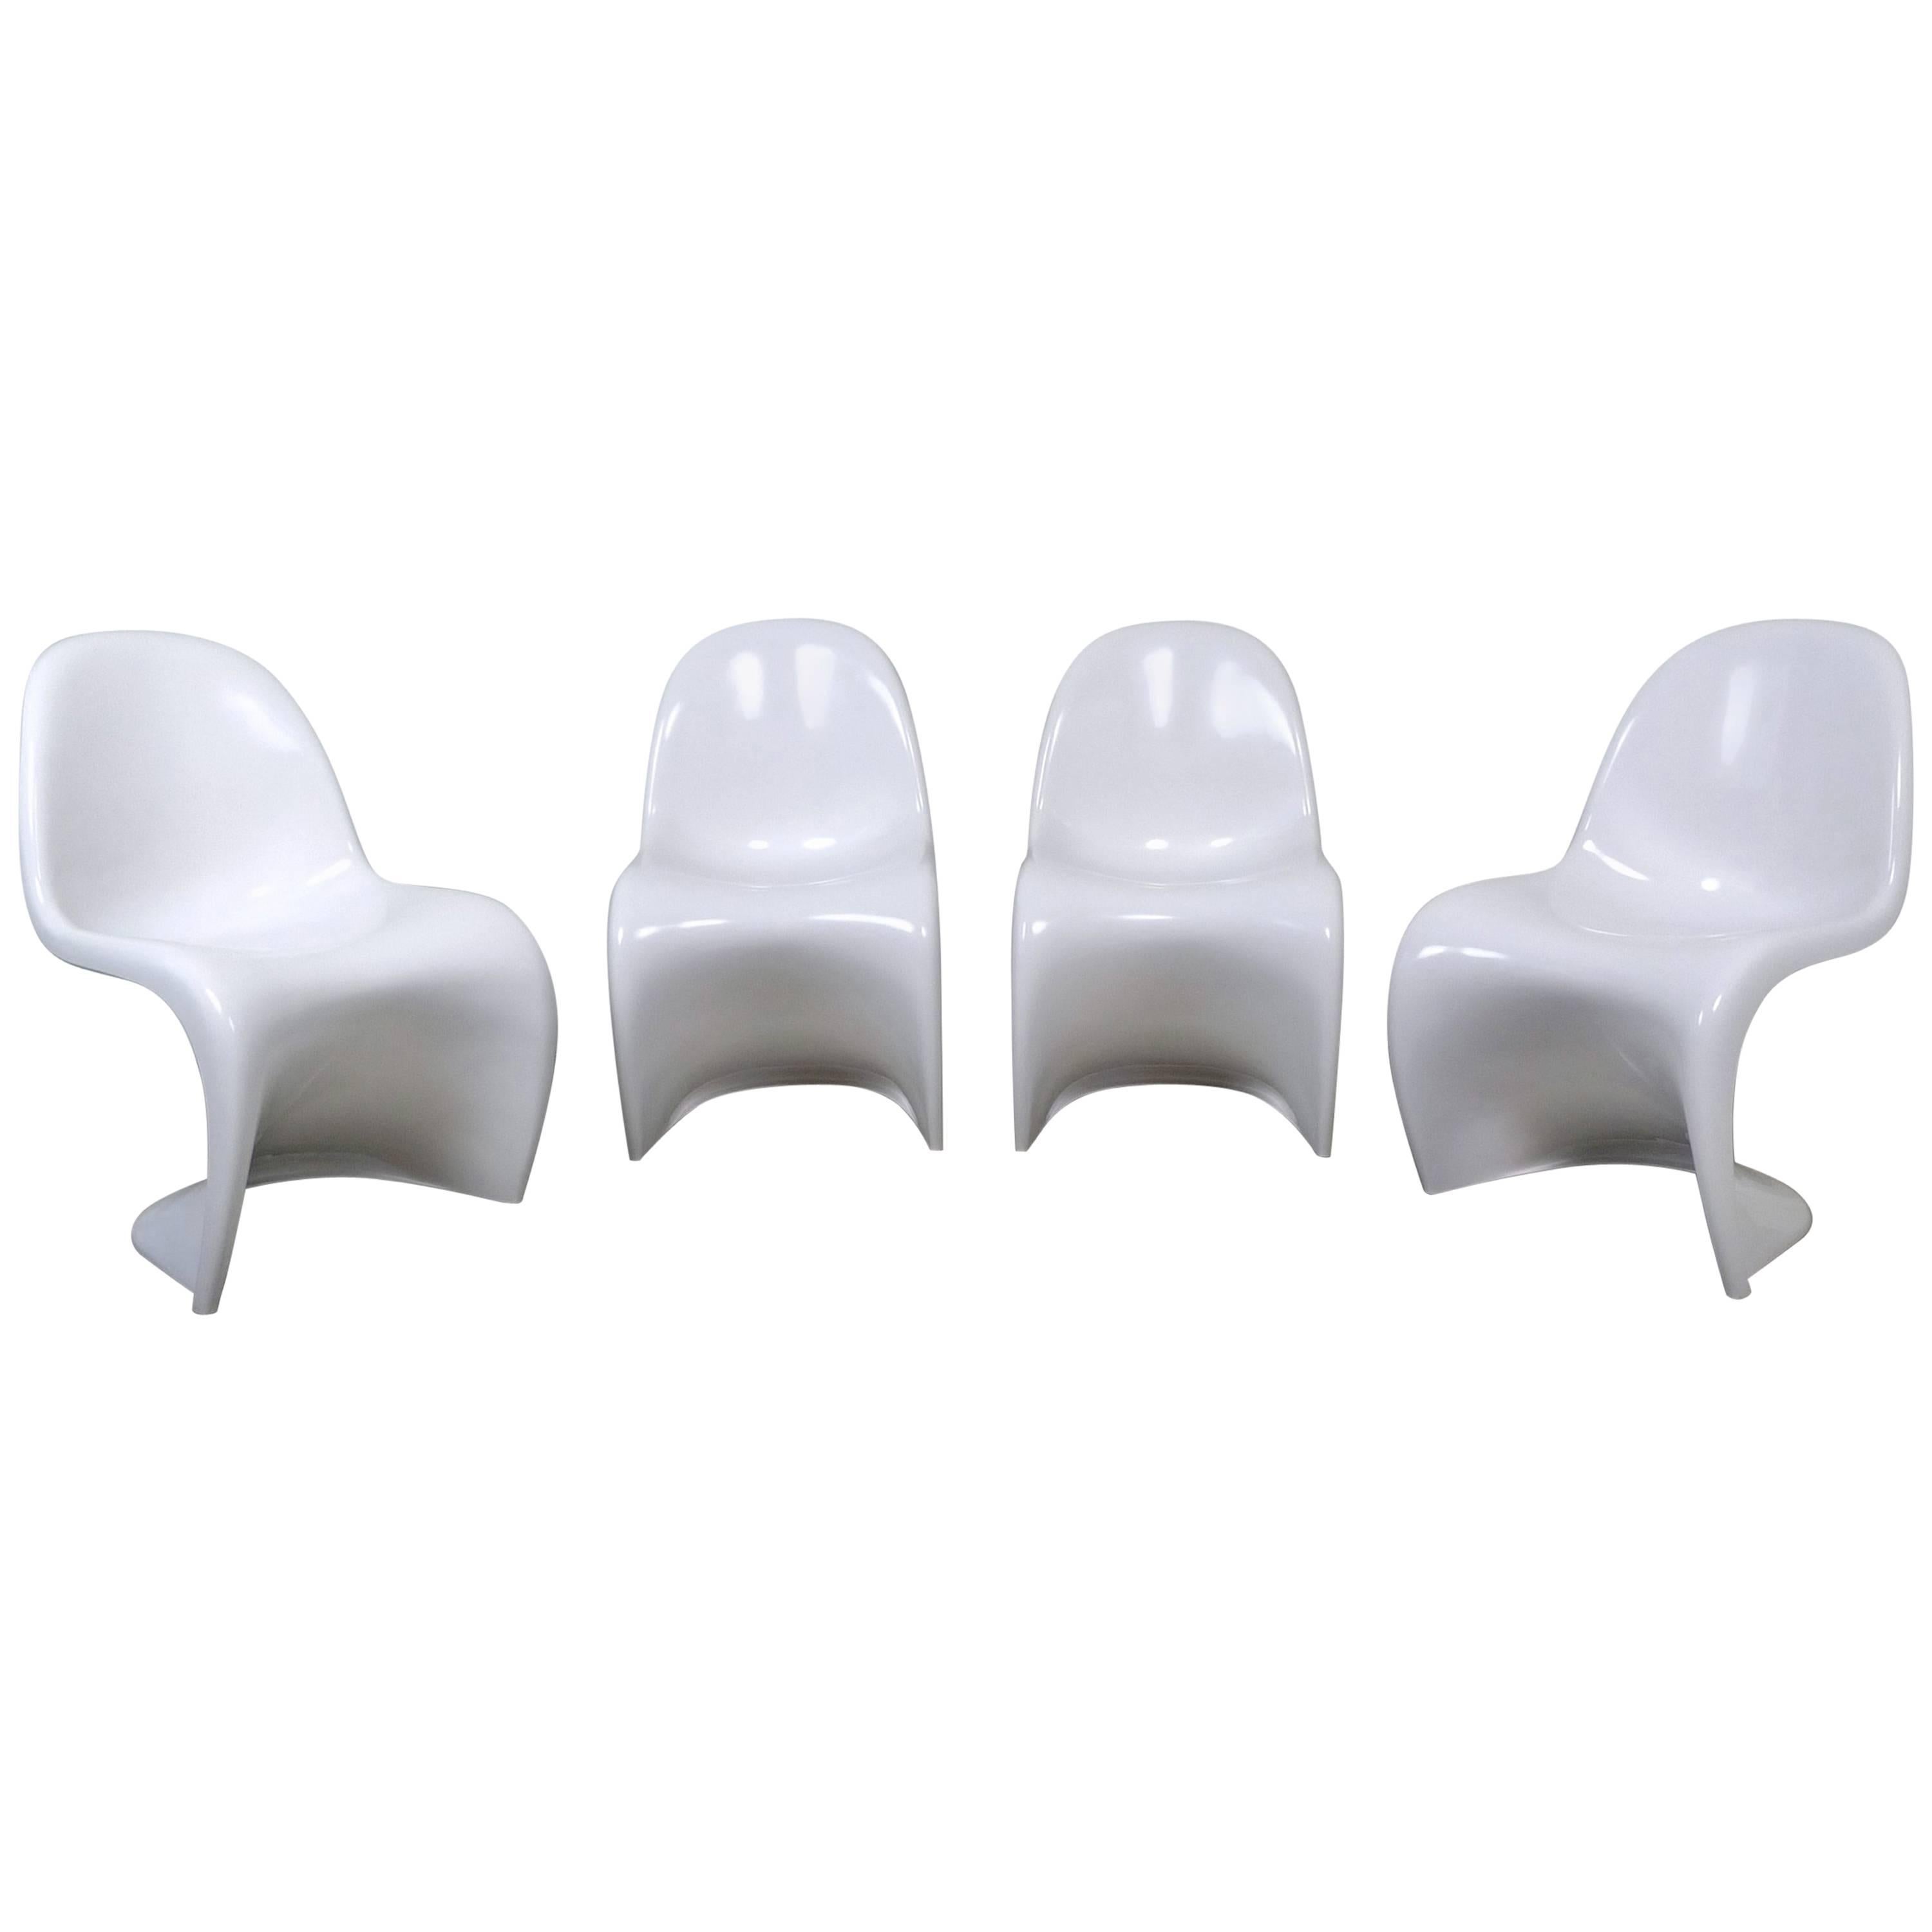 Set of Four White Panton Chairs by Verner Panton for Fehlbaum, Germany, 1971 For Sale